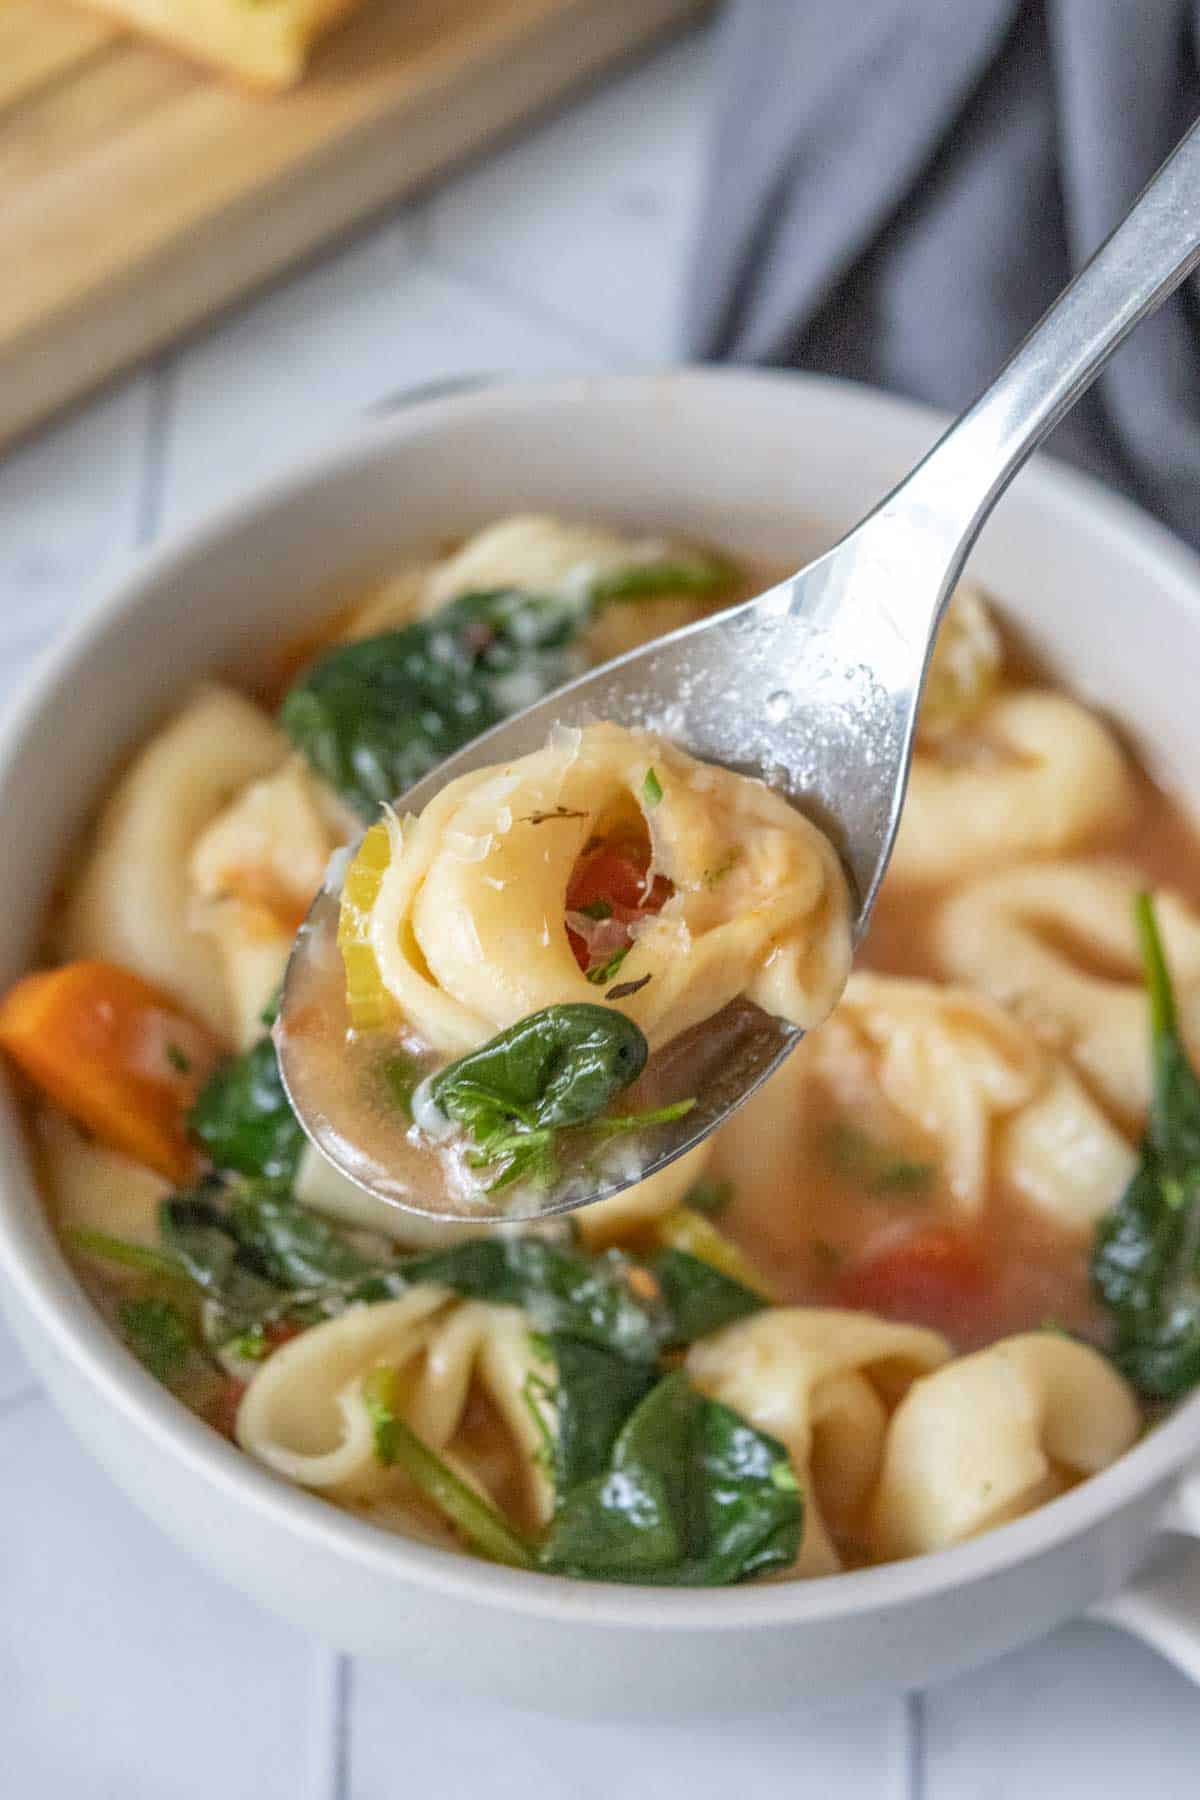 Spoonful of tortellini soup held over bowl.